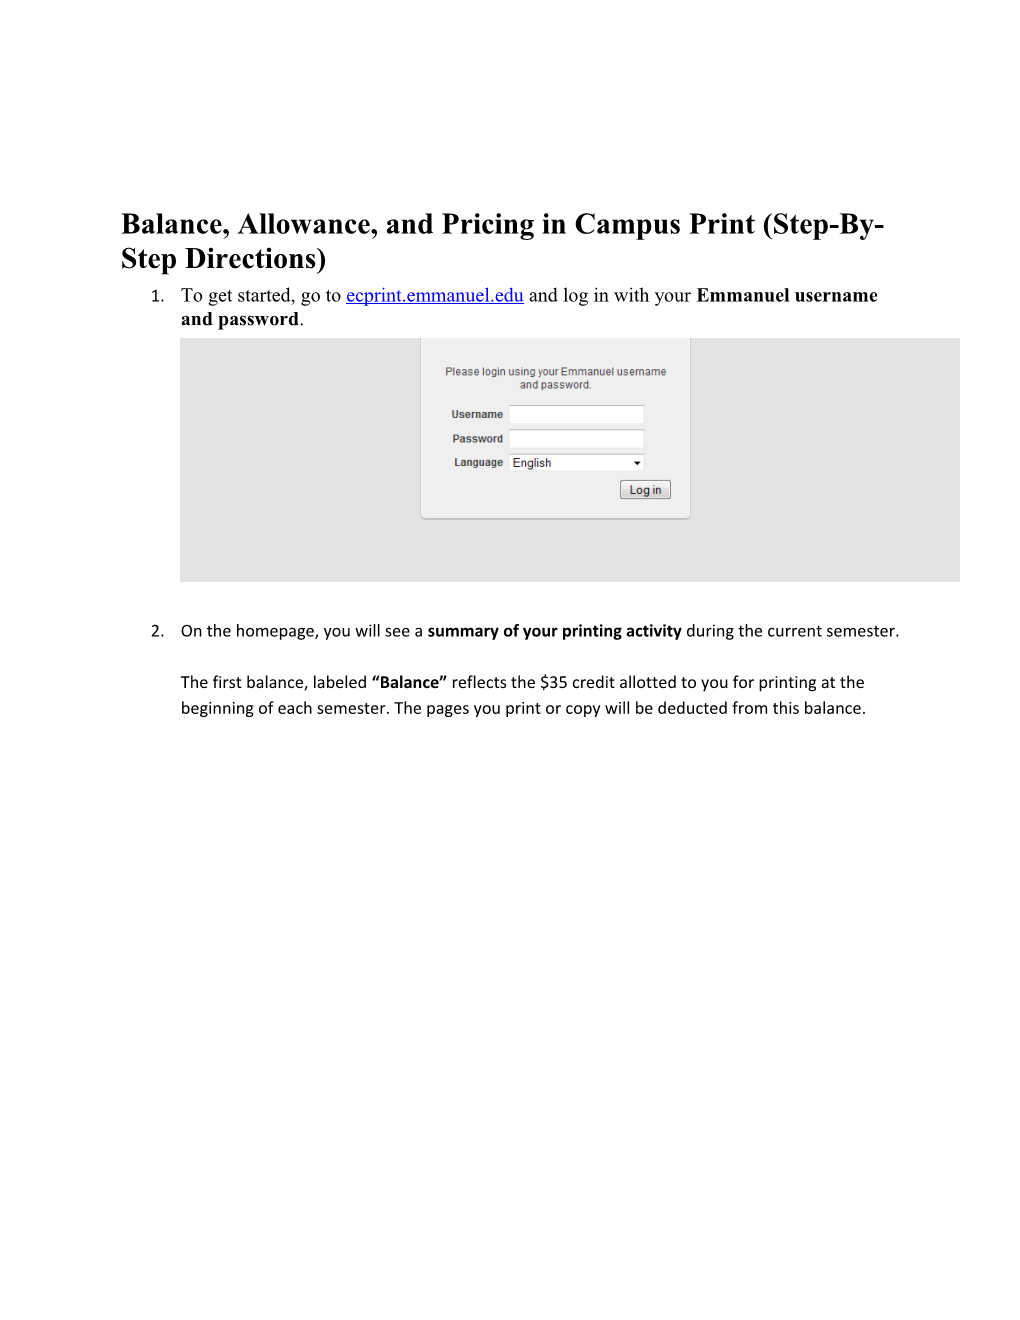 Balance, Allowance, and Pricing in Campus Print (Step-By-Step Directions)